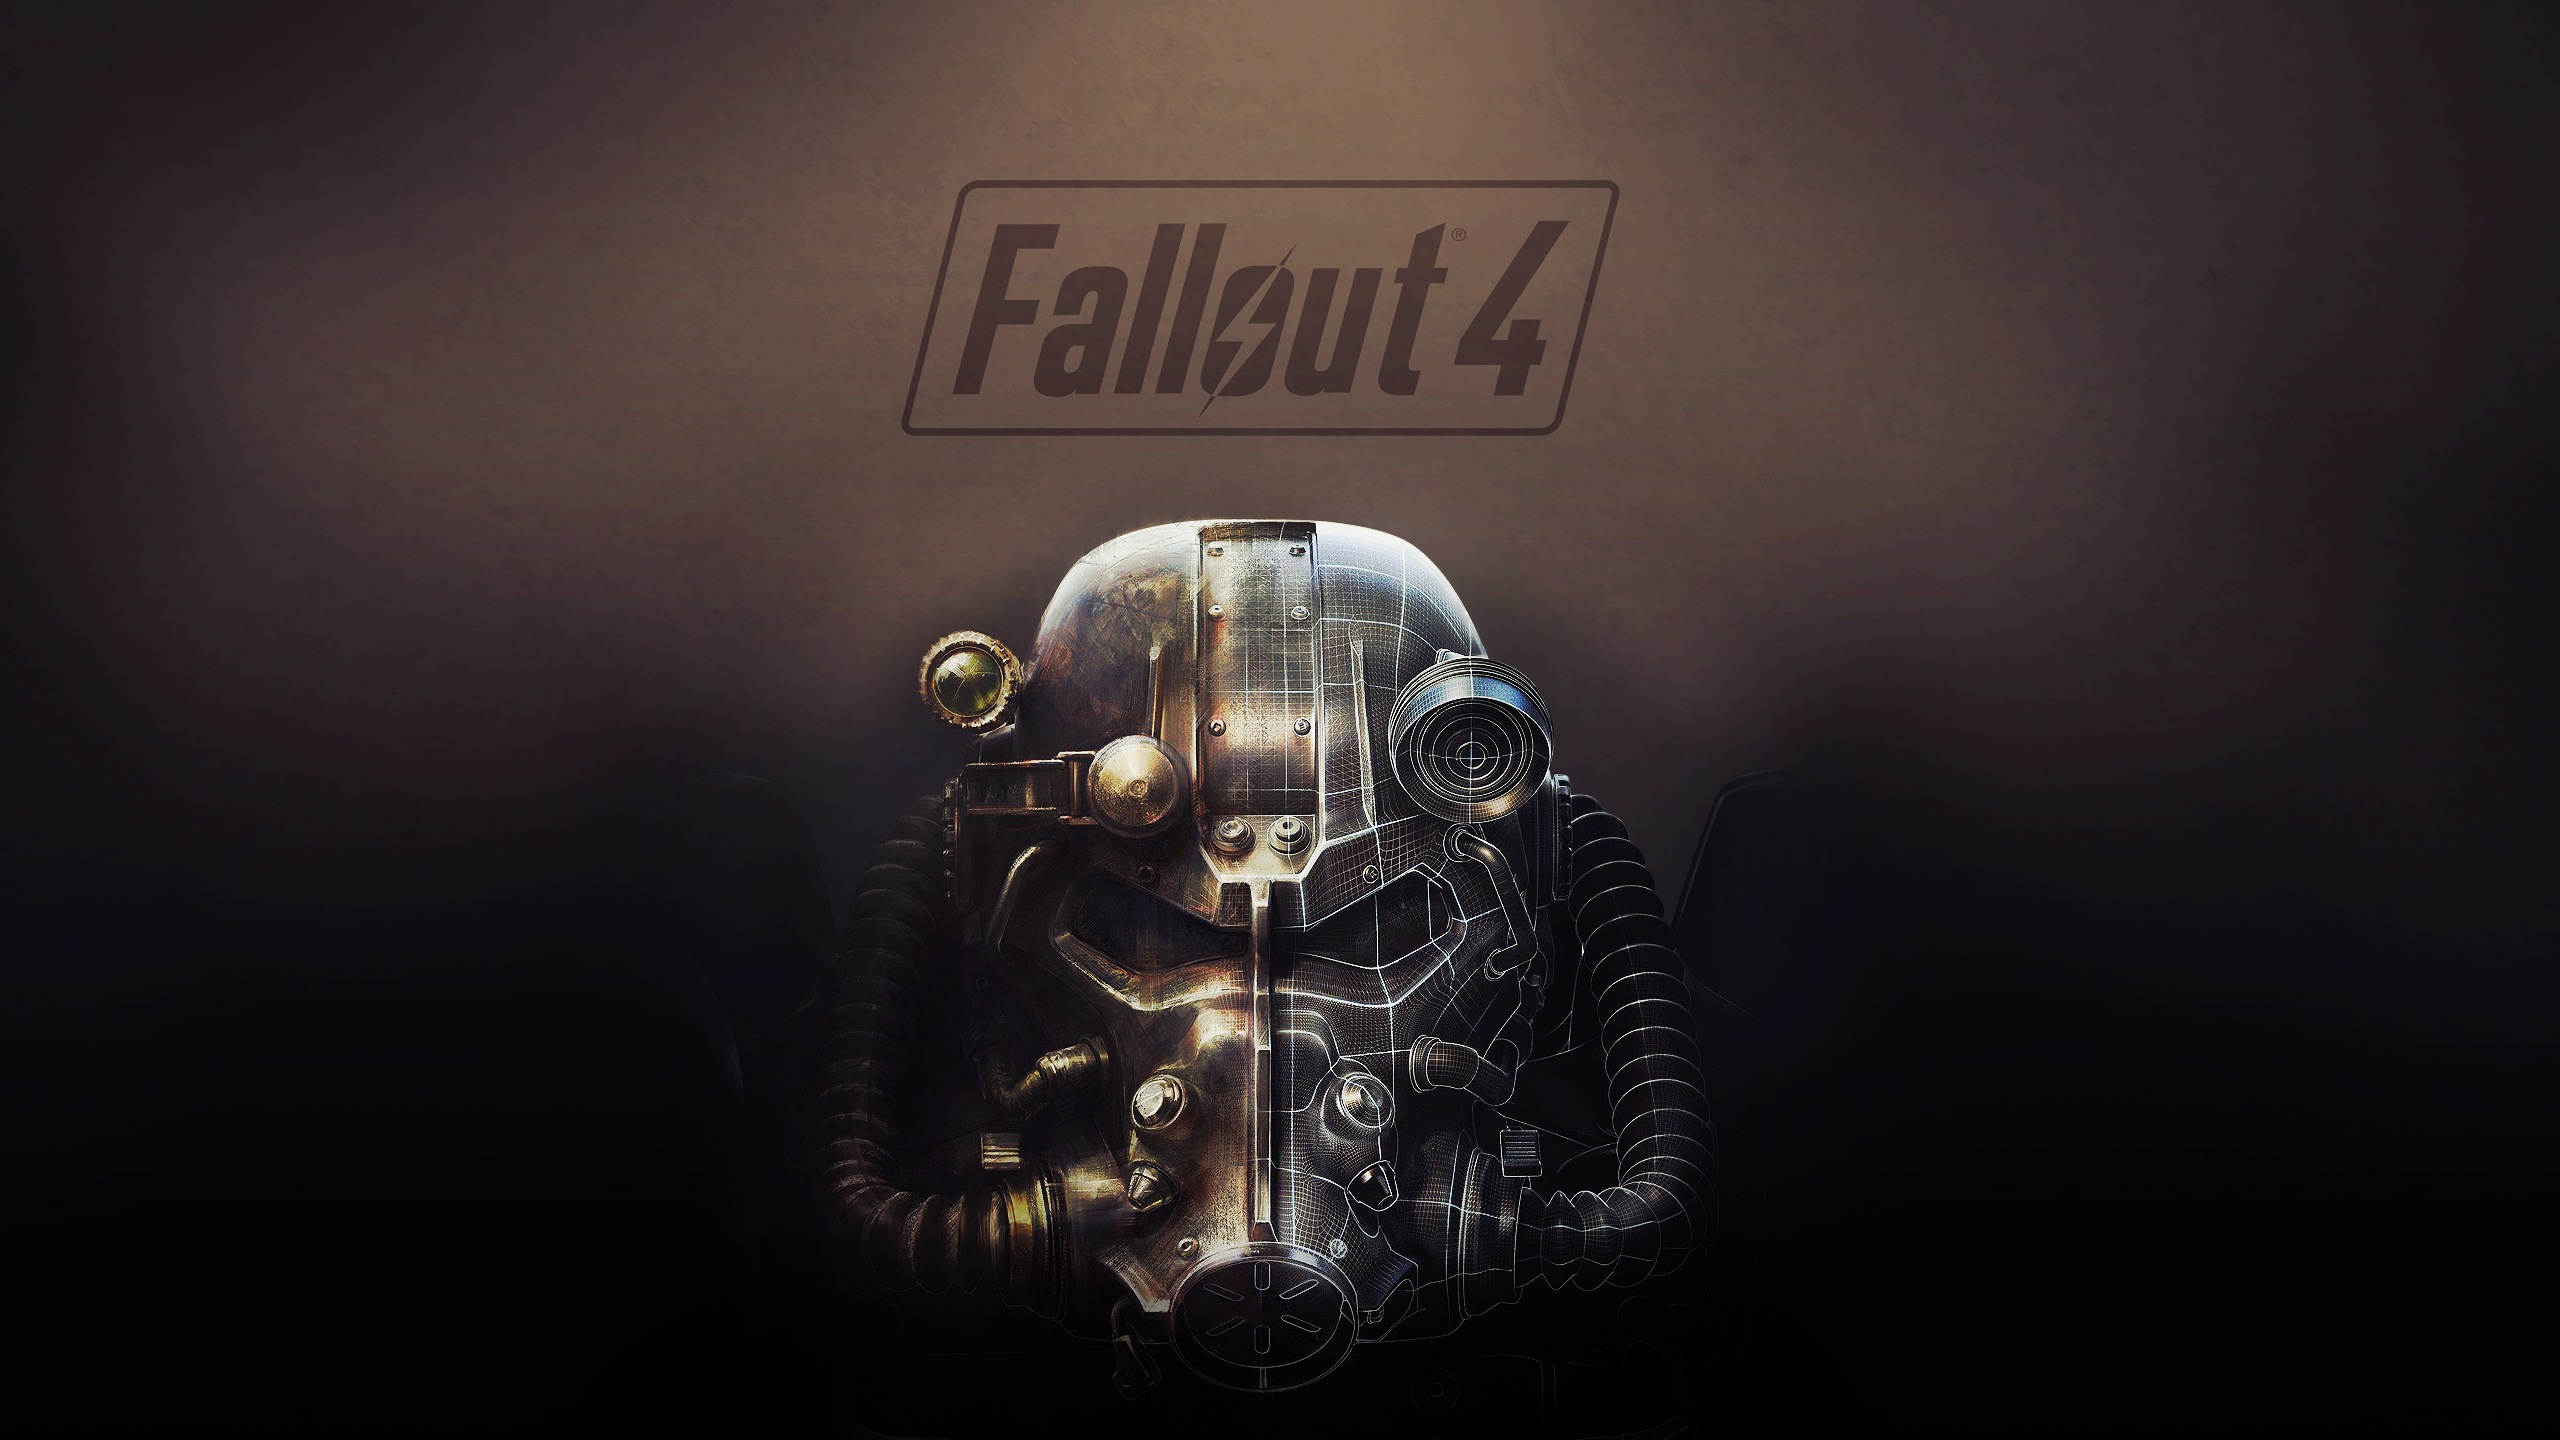 Fallout Wallpaper Awesome Image For Your Puter